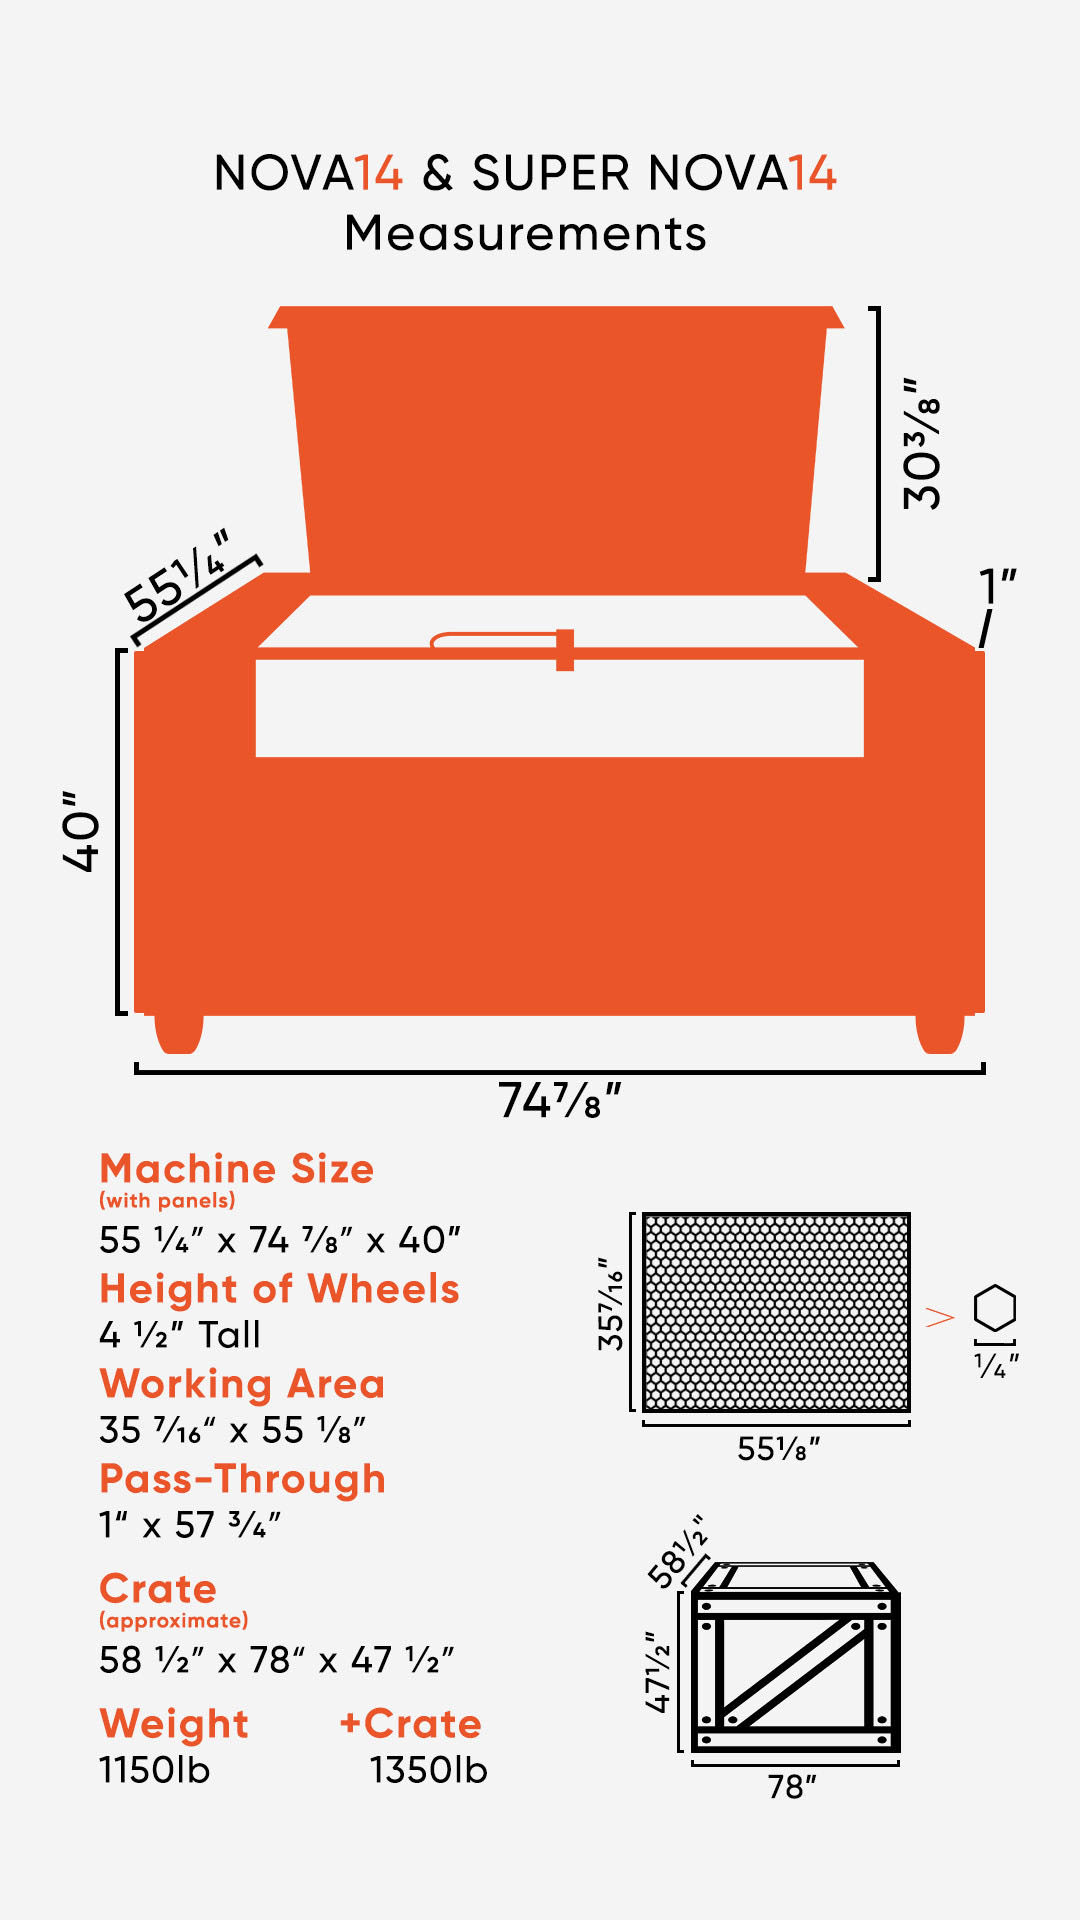 Graphic showing the dimensions of the Super NOVA 14 laser, crate size, and weight info